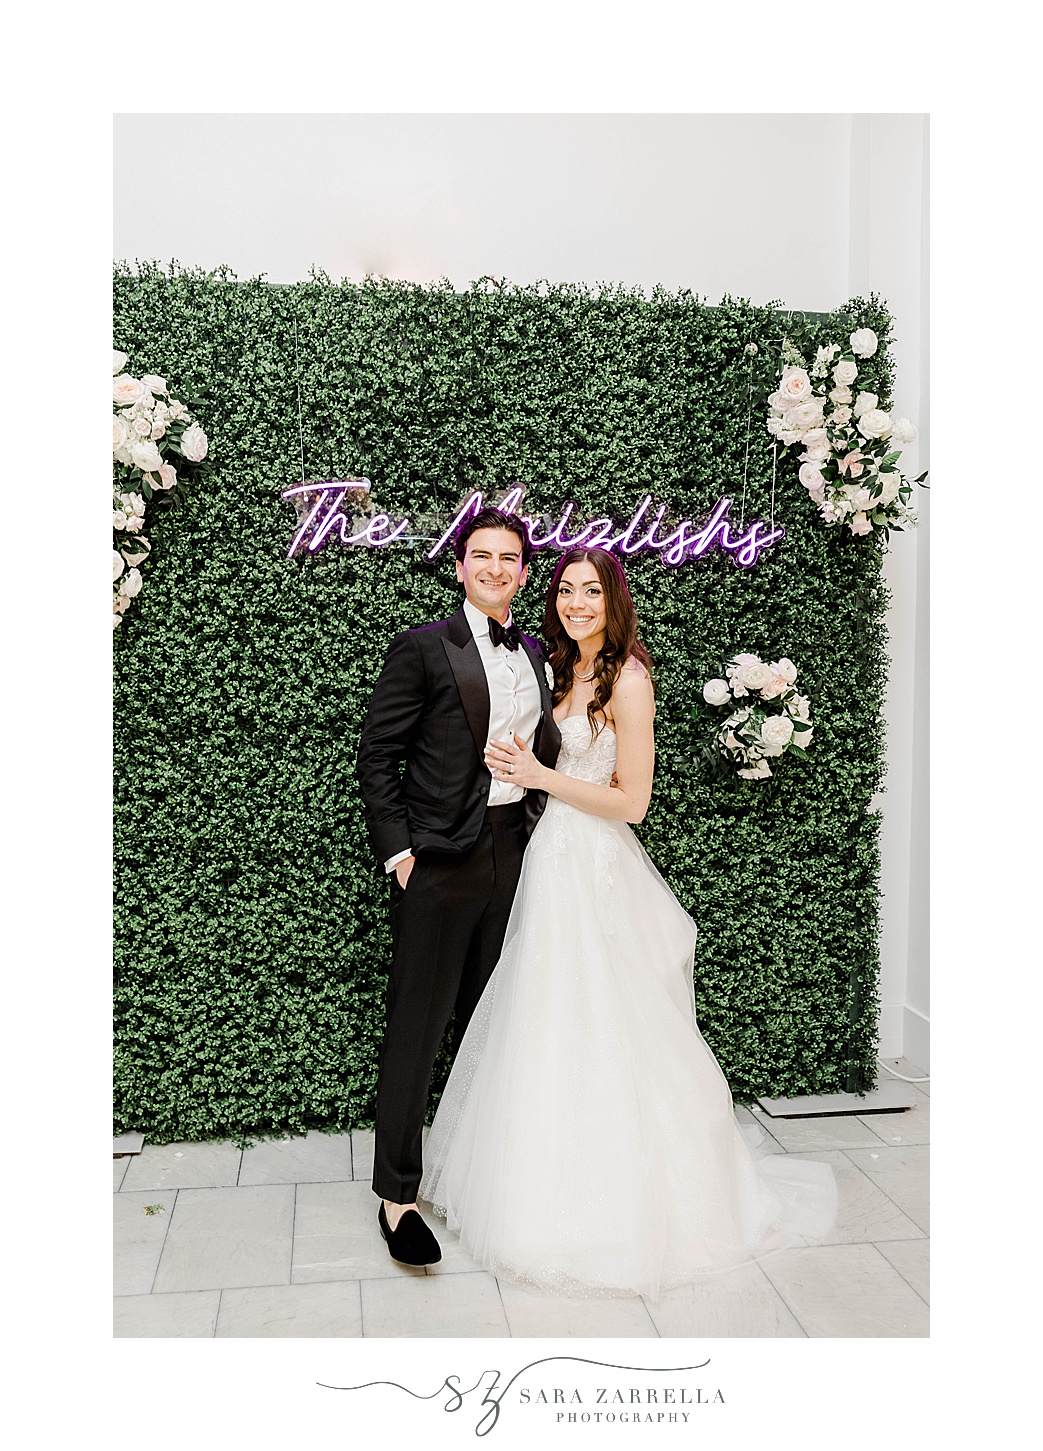 newlyweds pose by greenery wall with custom neon sign